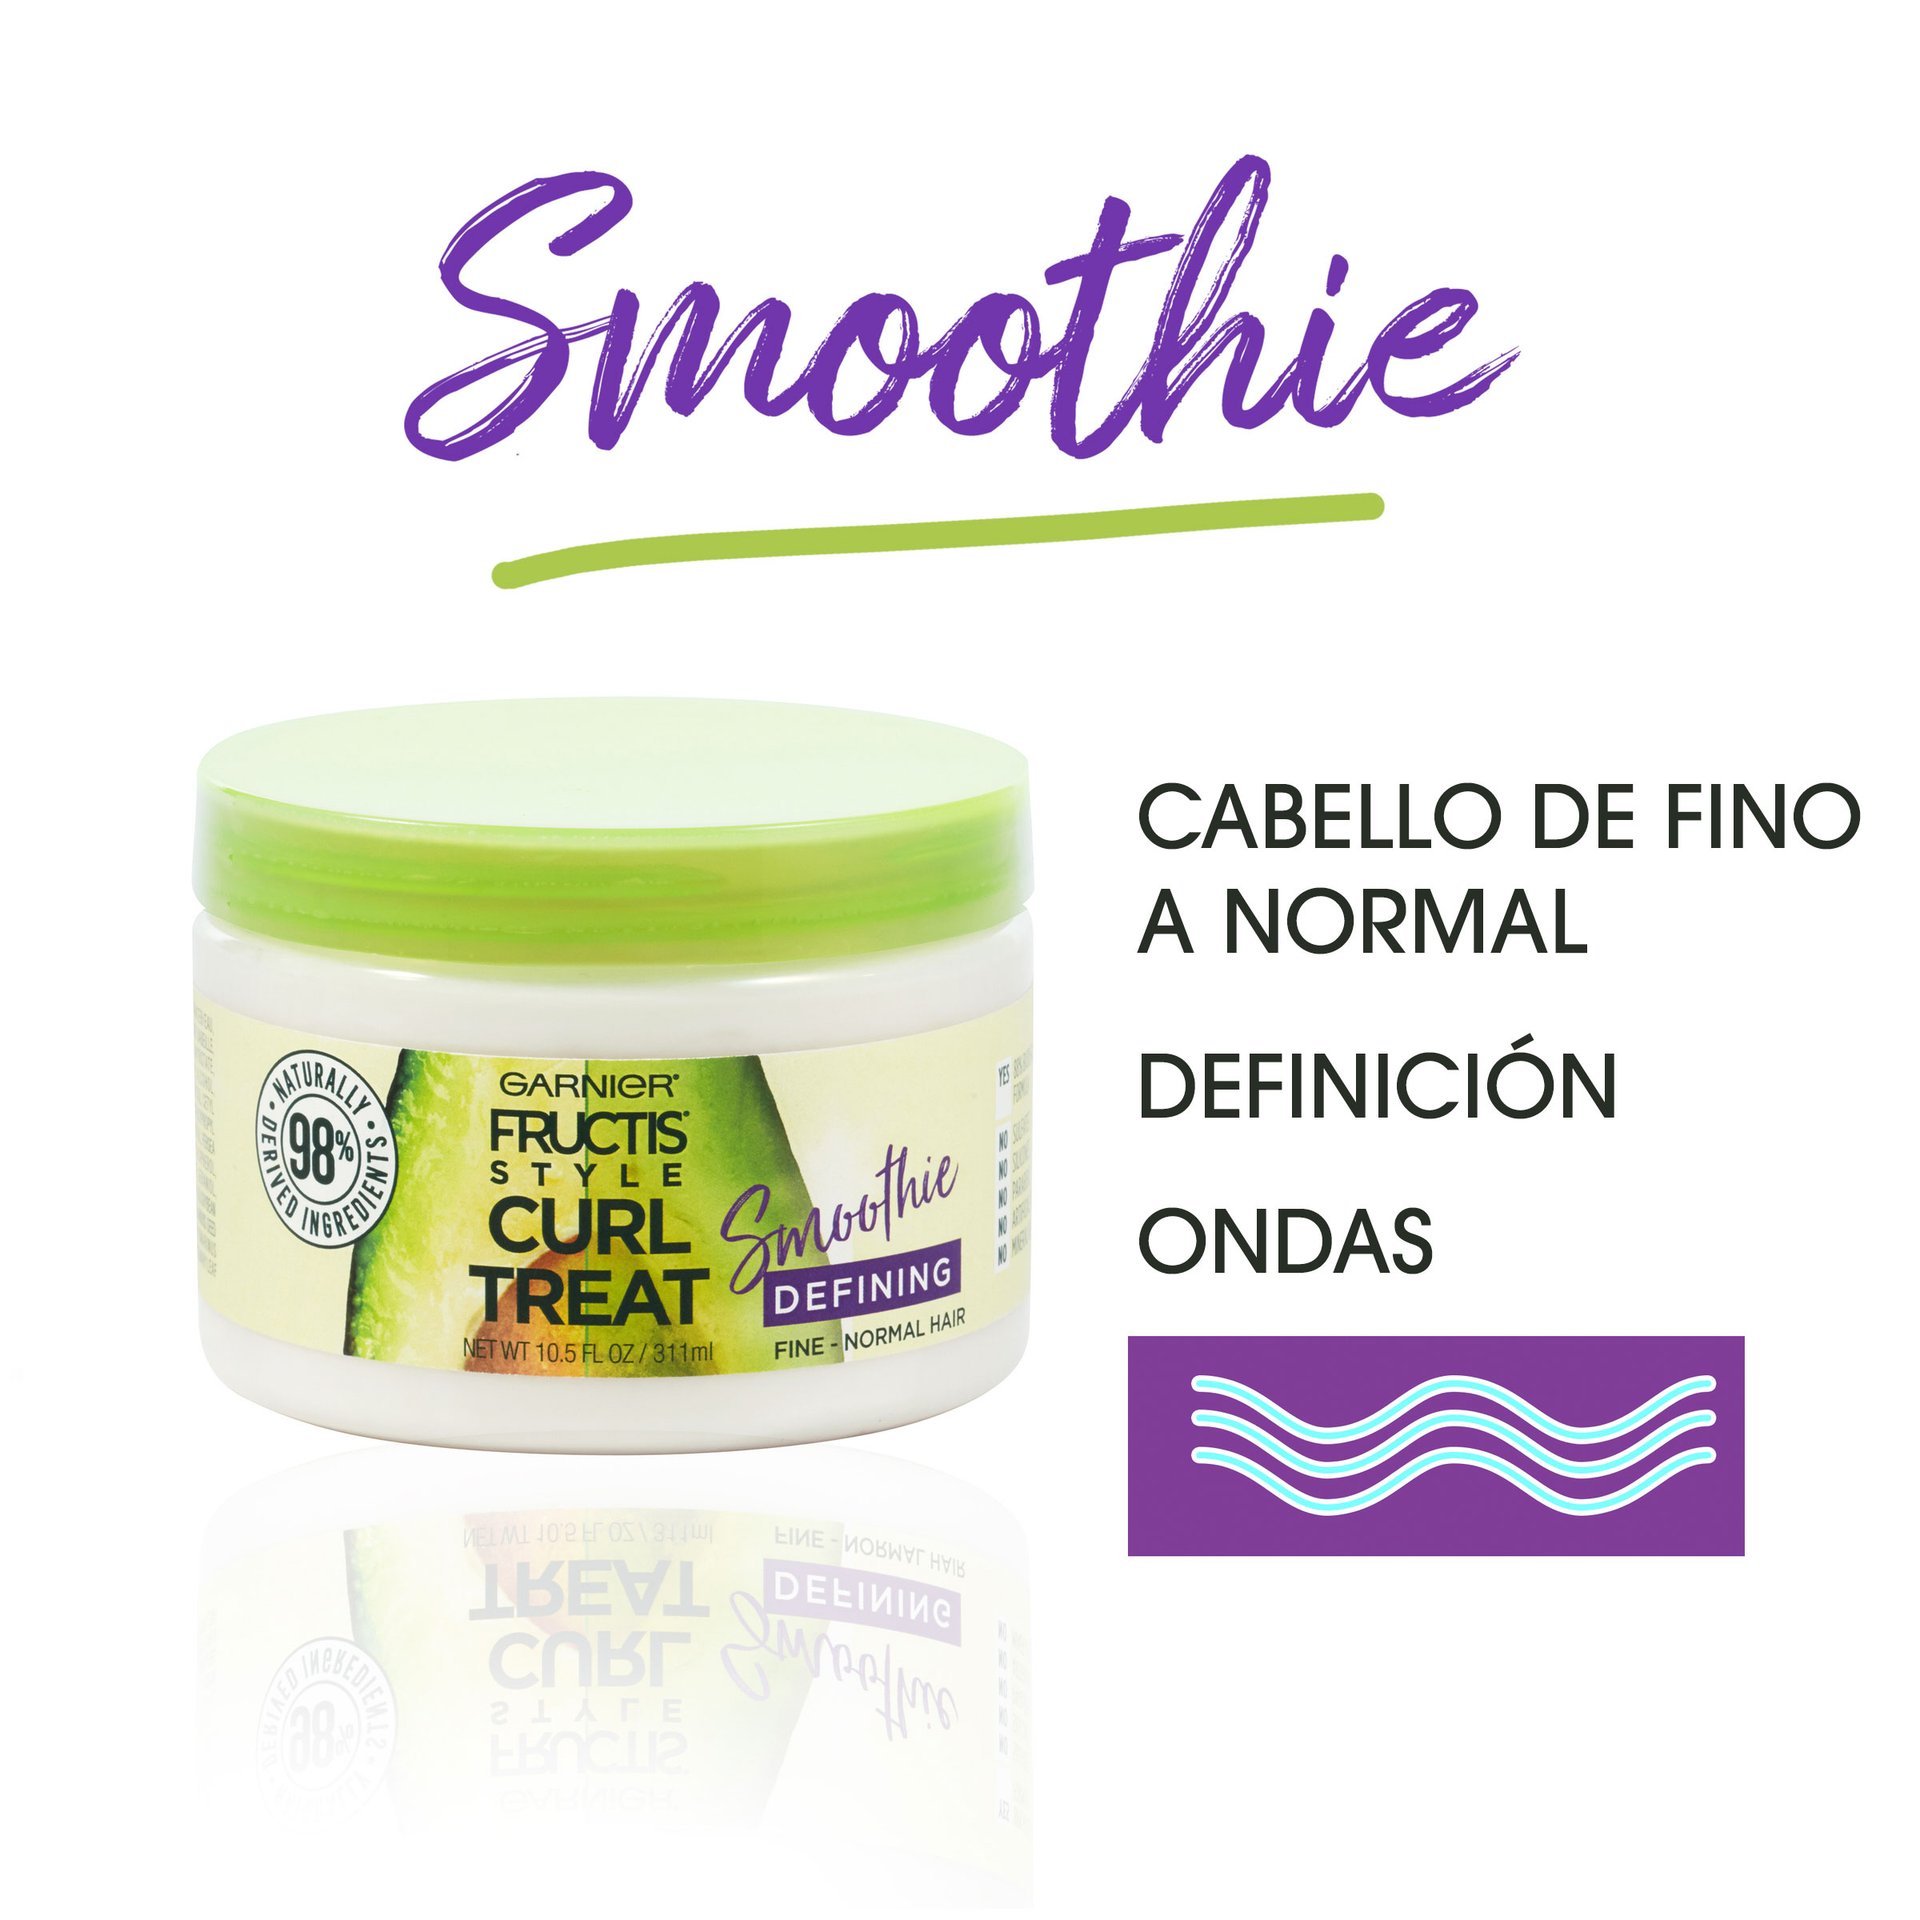 Curl Treat smoothie 98% perfect naturally derived ingredients